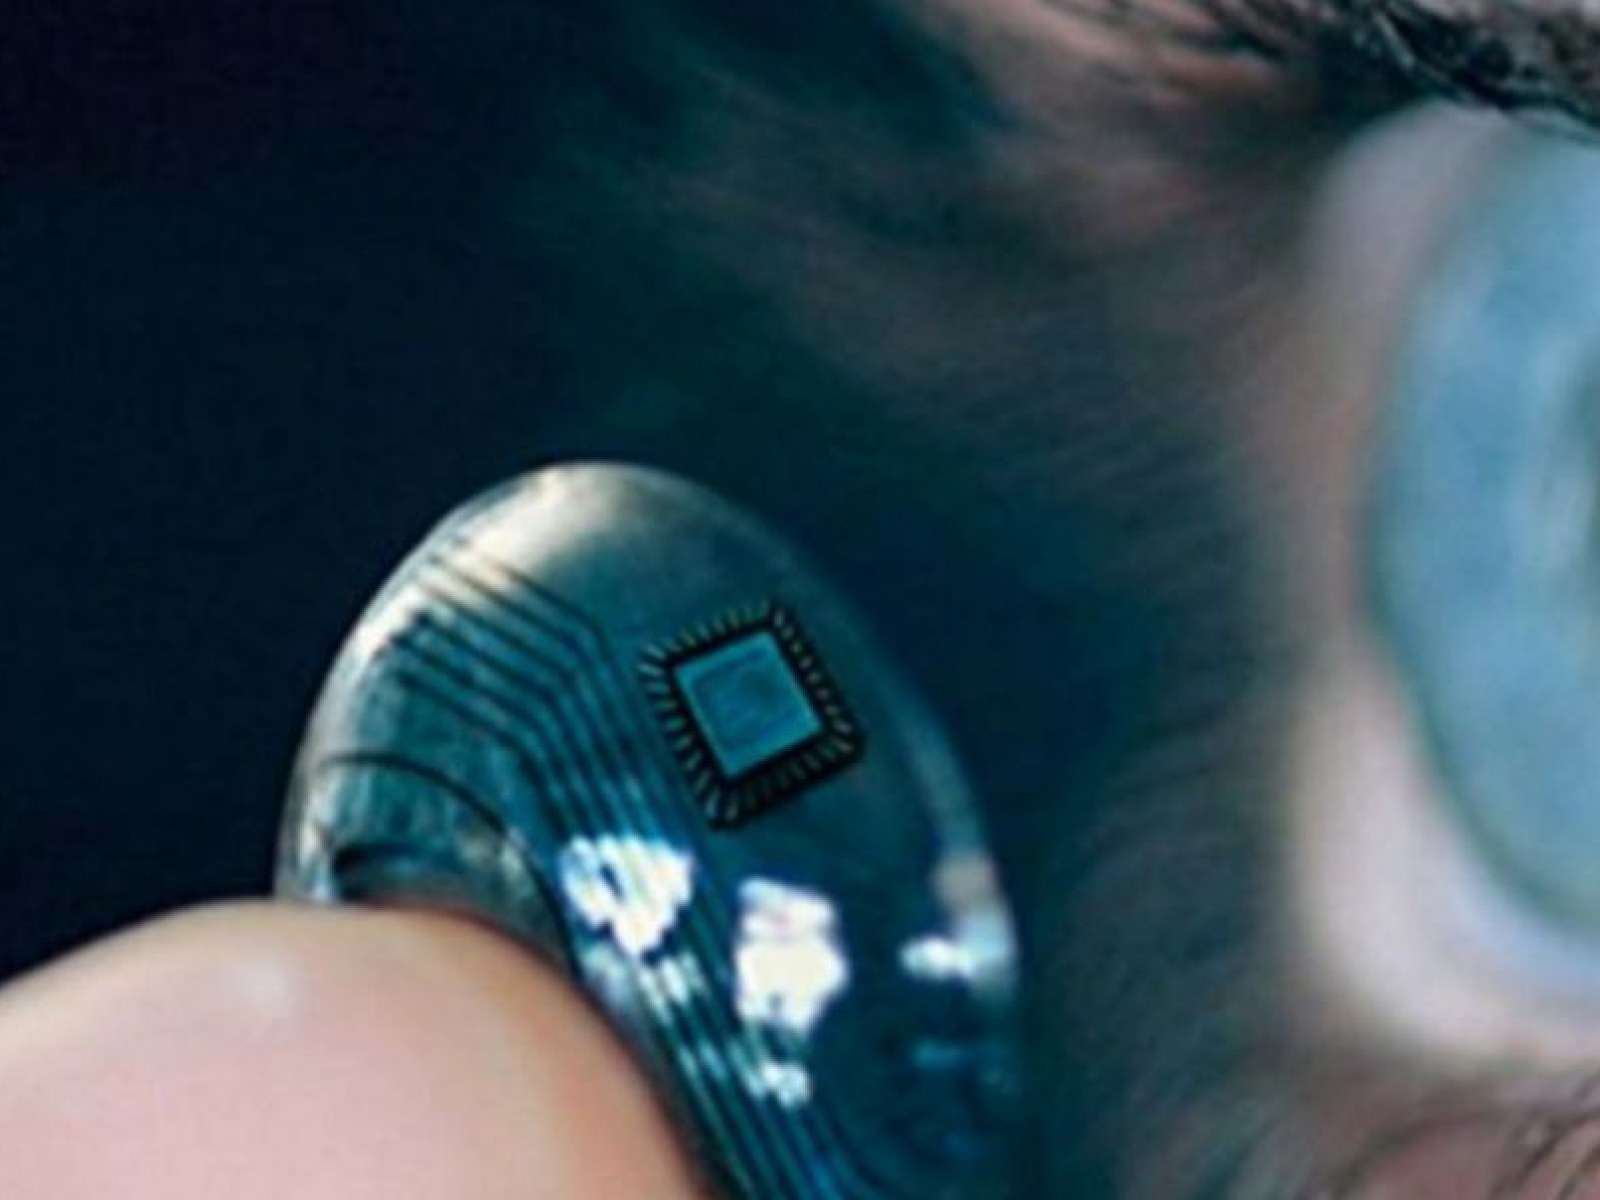 Samsung's Smart Contact Lenses Take Photos in the Blink of an Eye